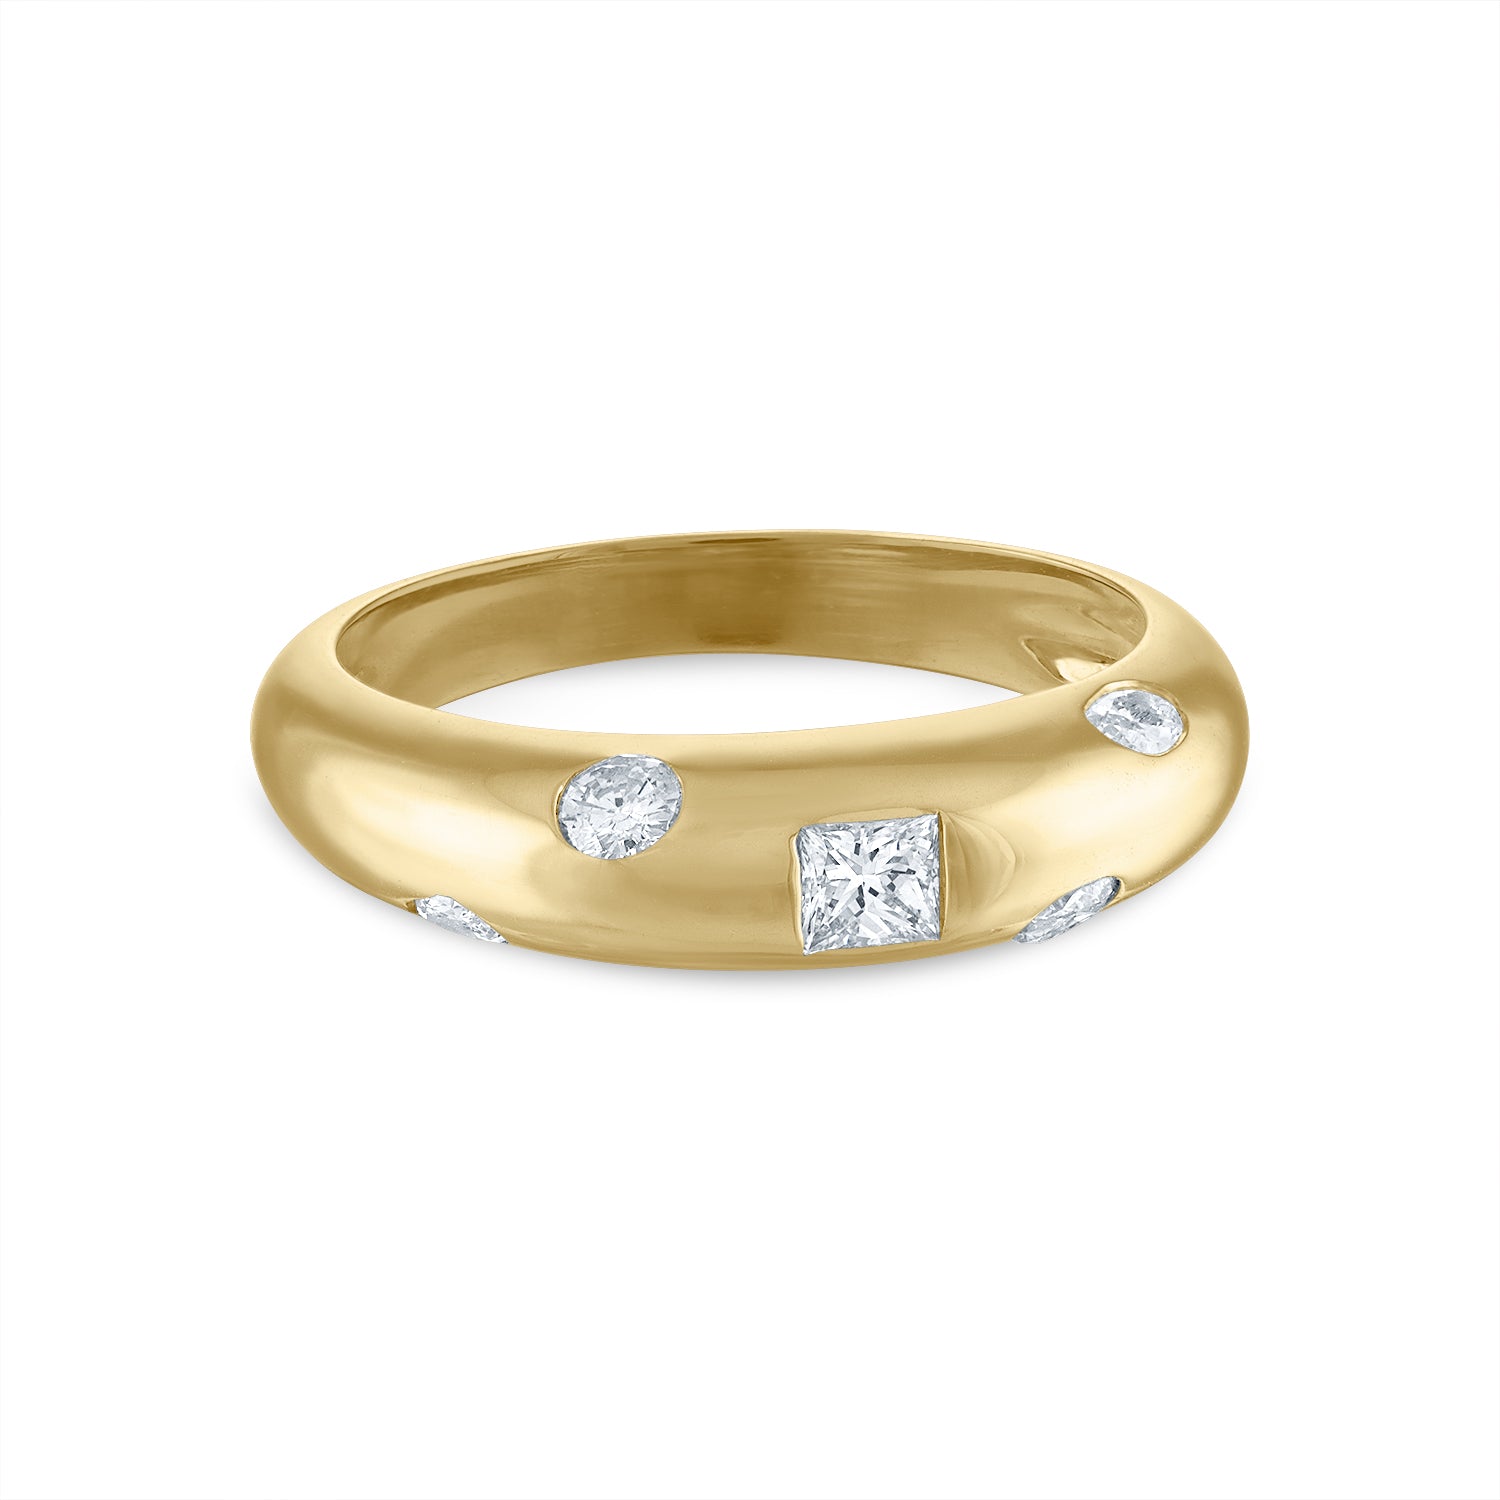 Thin Dome Ring with Square and Random Diamonds